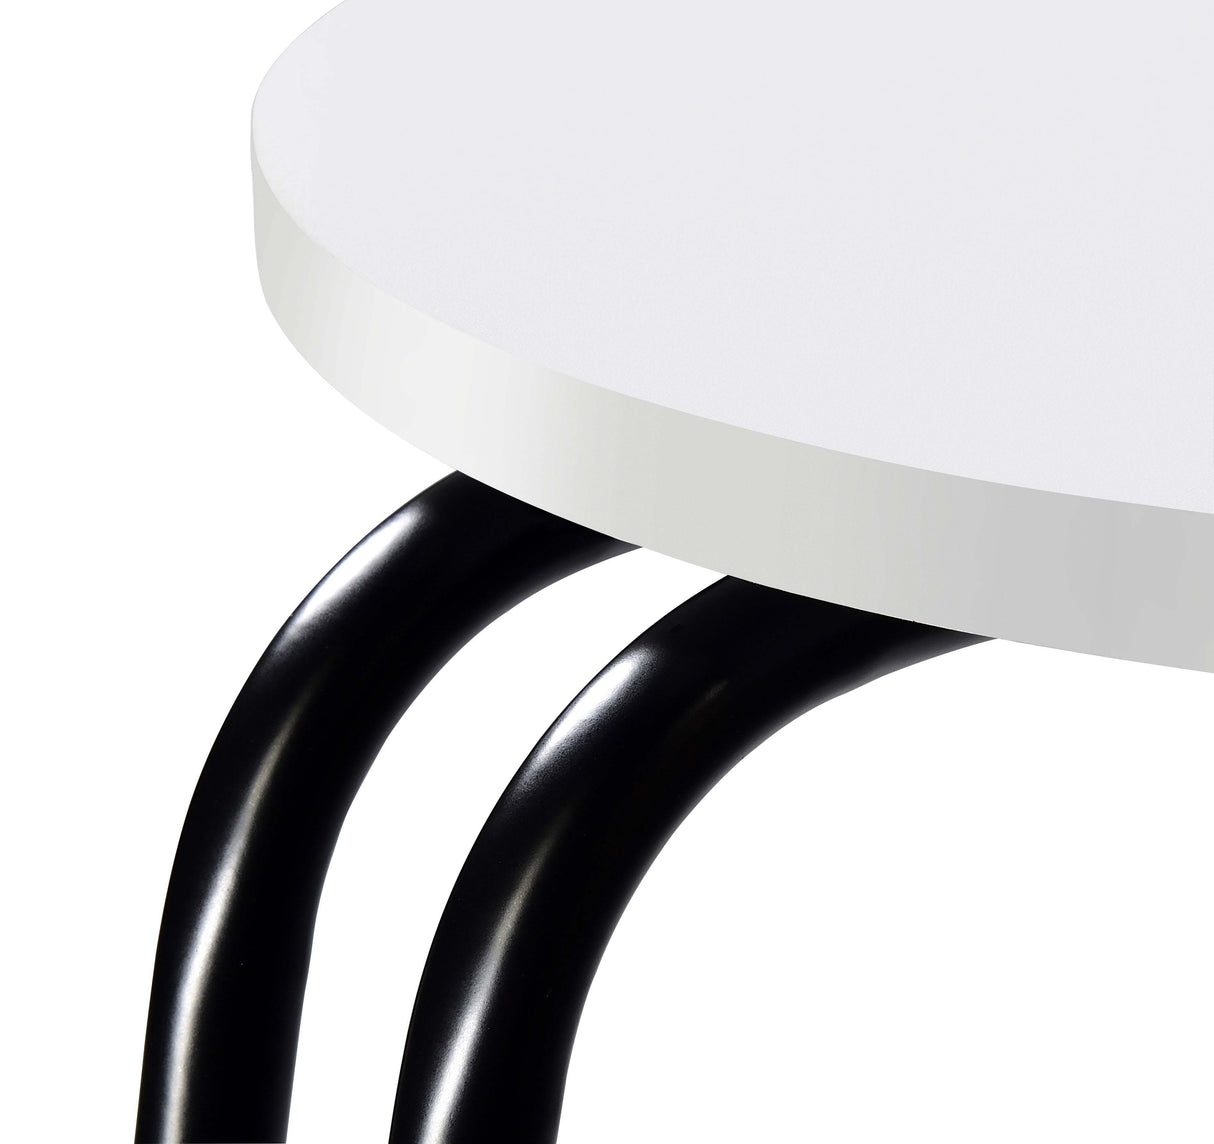 Side Table - Hilly 3-tier Round Side Table White and Black